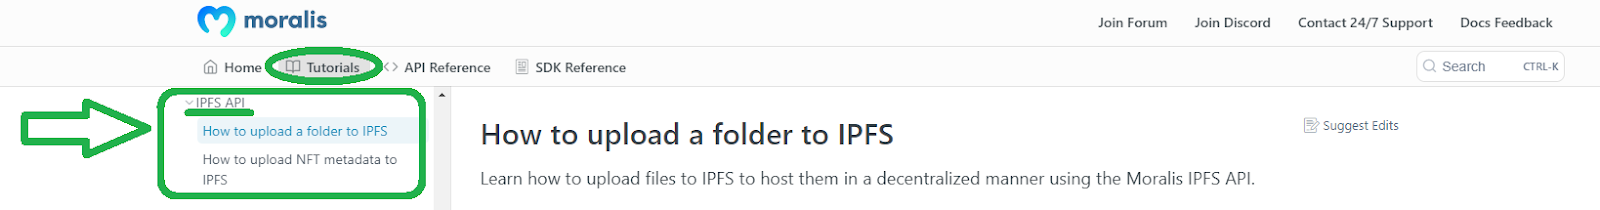 the ipfs api documentation page from moralis